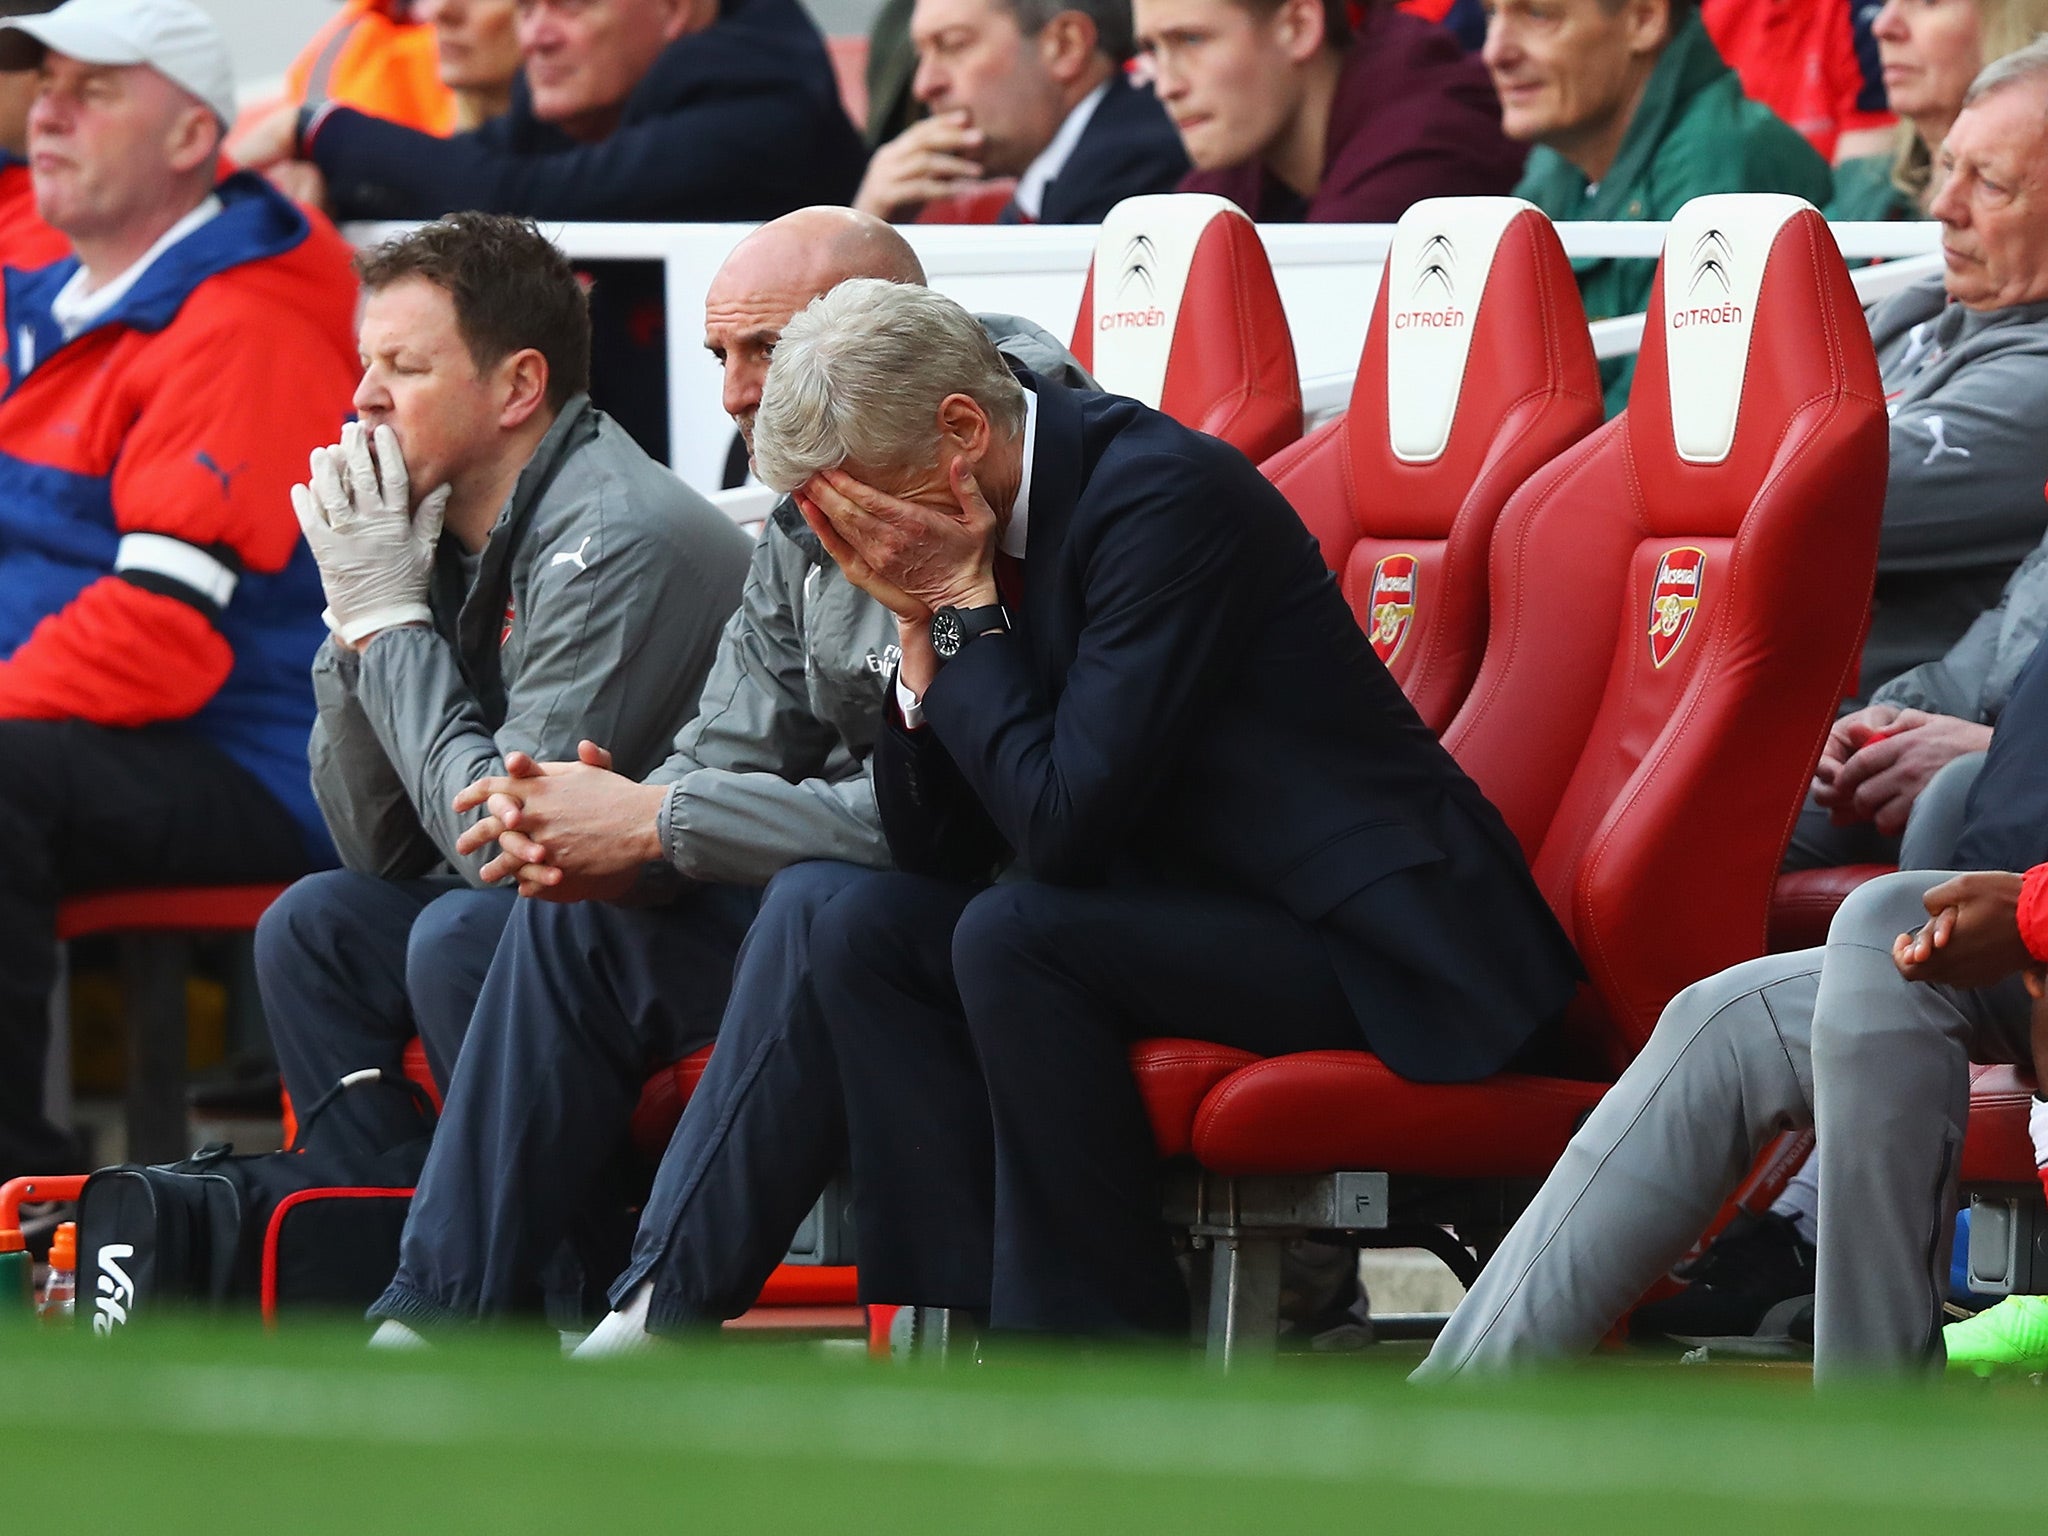 Arsene Wenger's side did not emerge for the second half with a designated captain